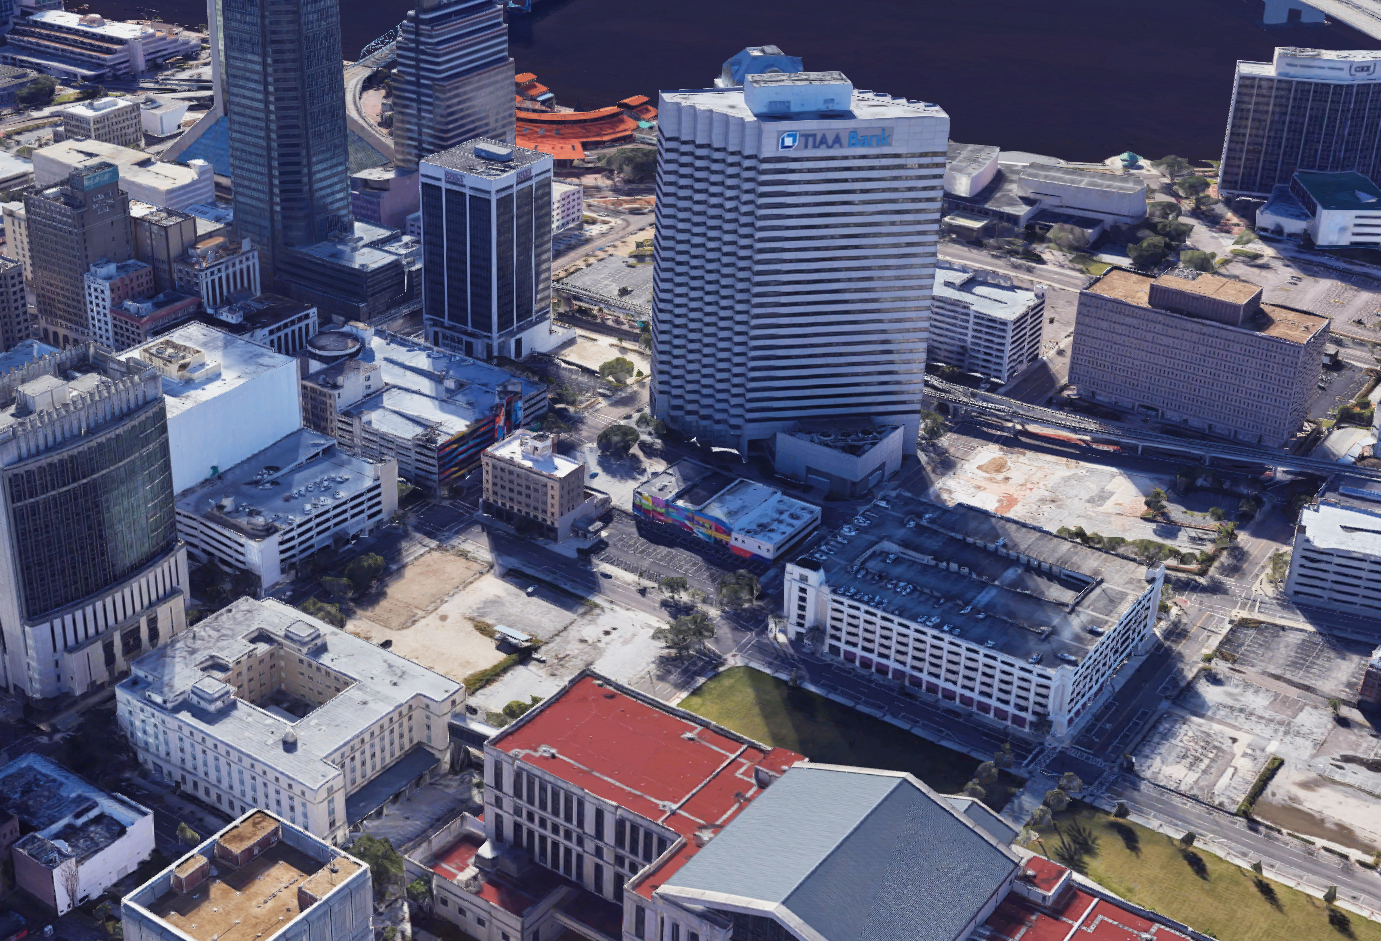 The property is within walking distance to the Duval County Courthouse, the Bryan Simpson United States Courthouse and Jacksonville City Hall.